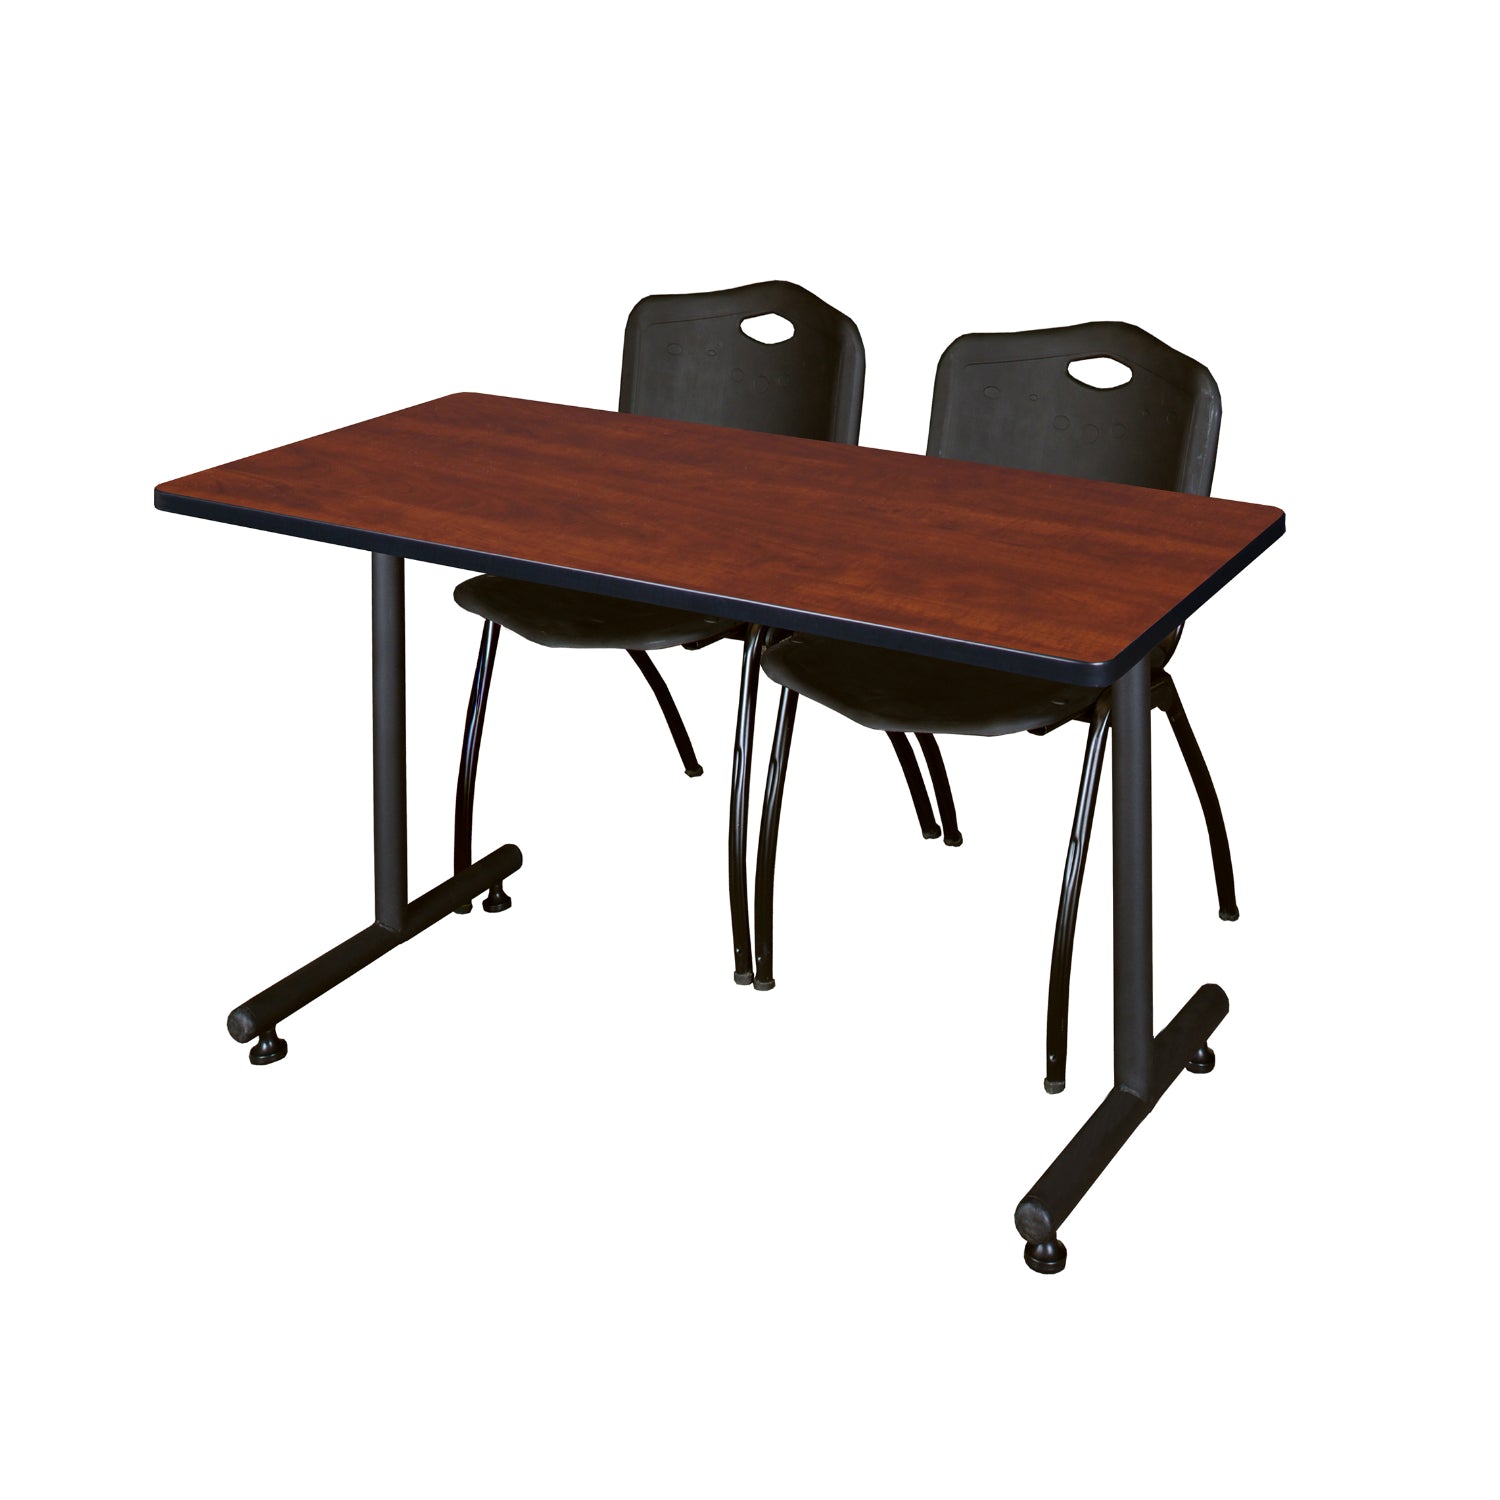 Kobe Training Table and Chair Package, Kobe 48" x 24" T-Base Training/Seminar Table with 2 "M" Stack Chairs